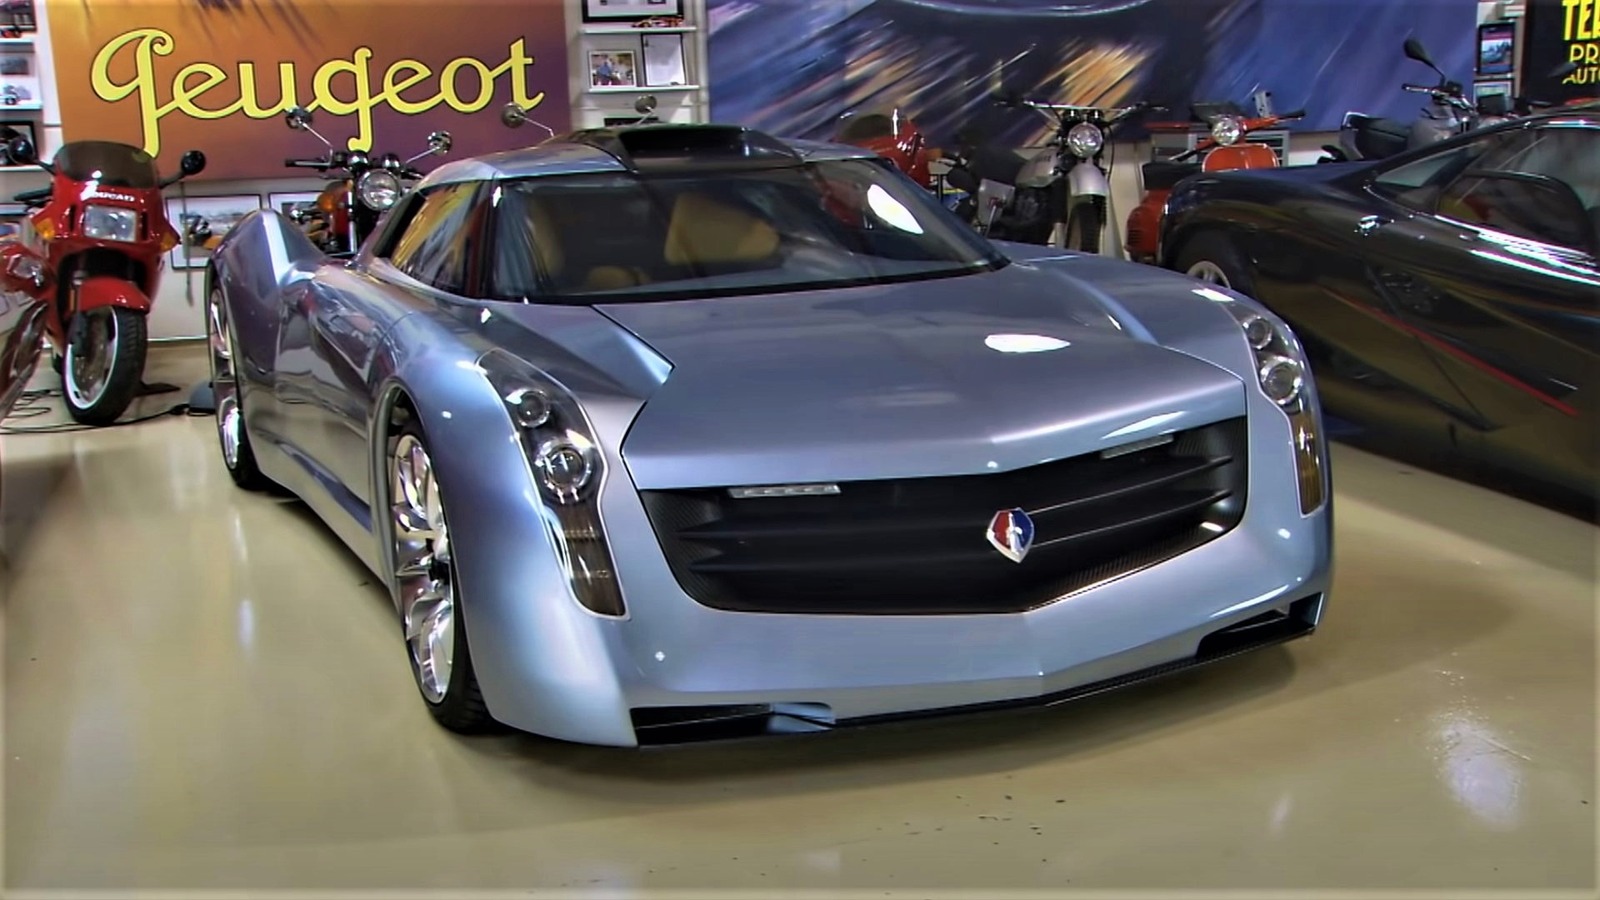 The Reason Jay Leno Teamed Up With General Motors To Build A Jet Car